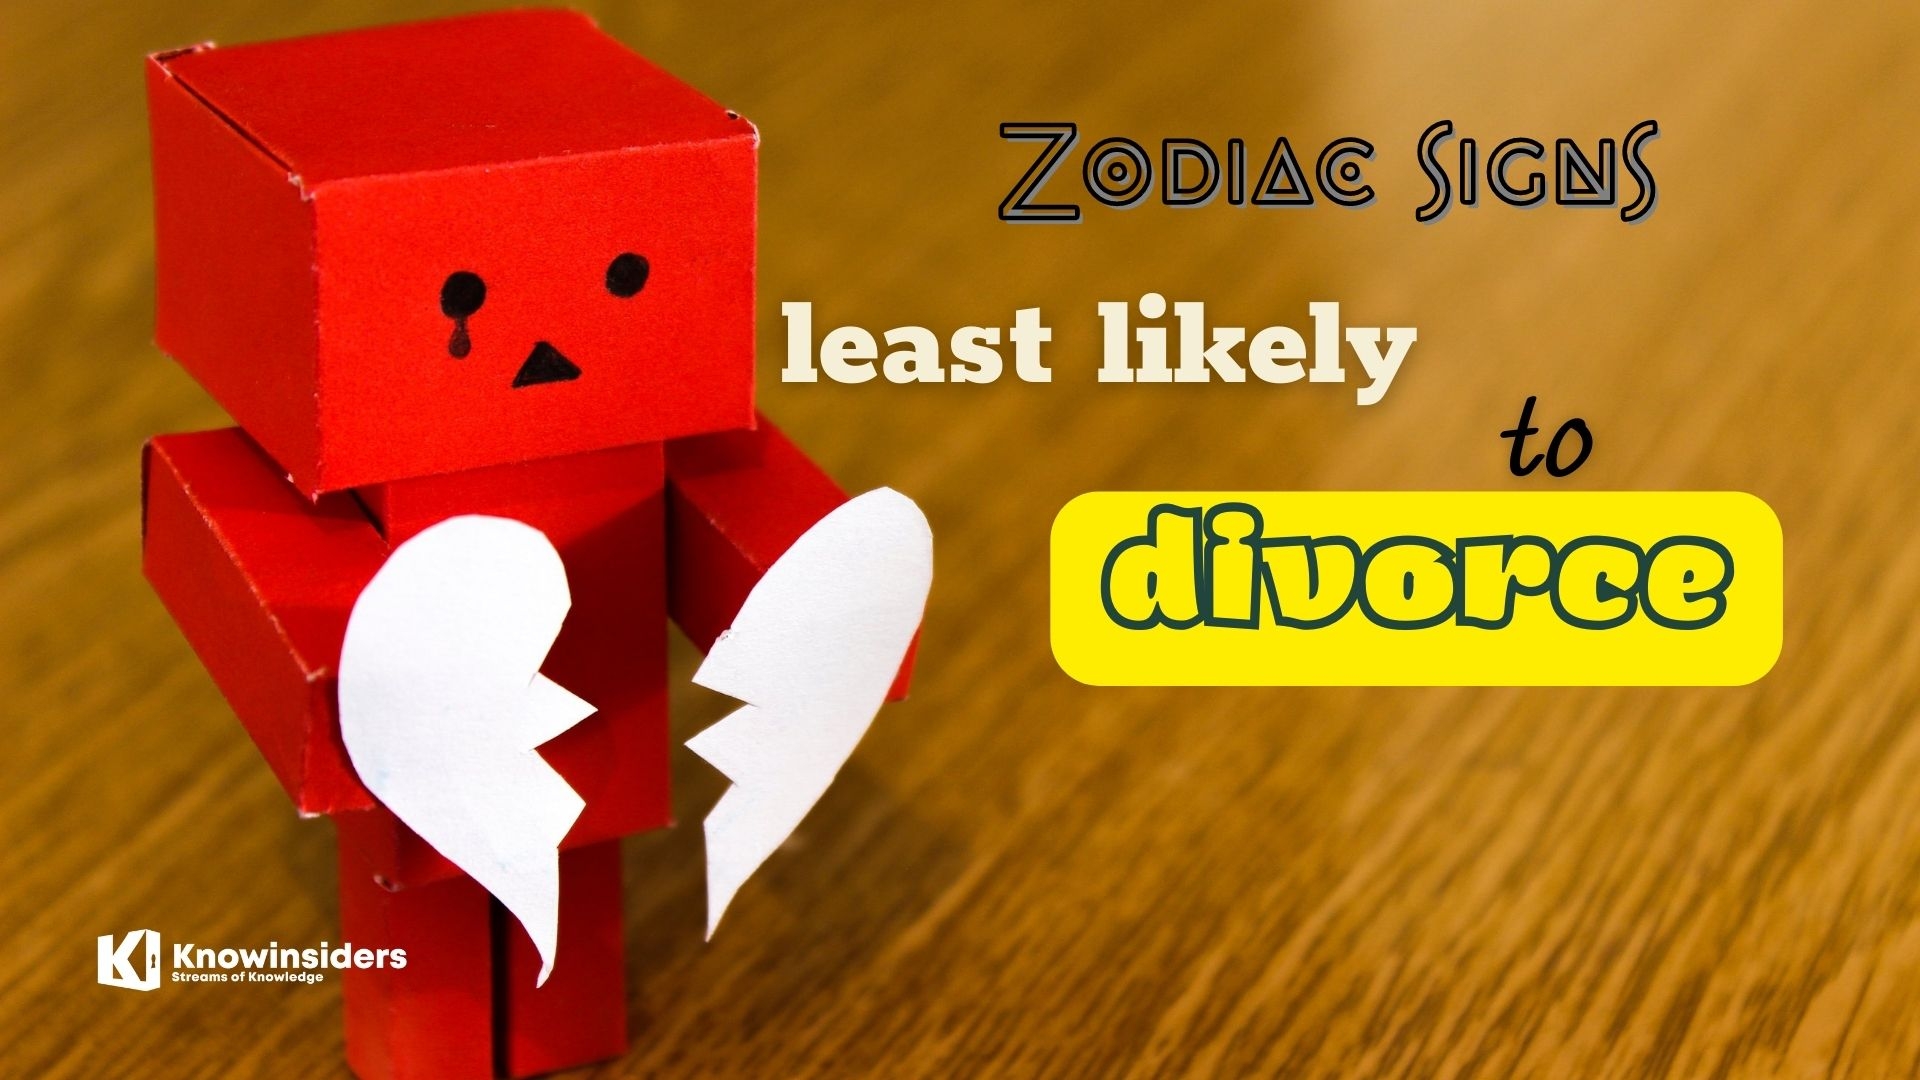 Top 5 Zodiac Signs Least Likely To Divorce